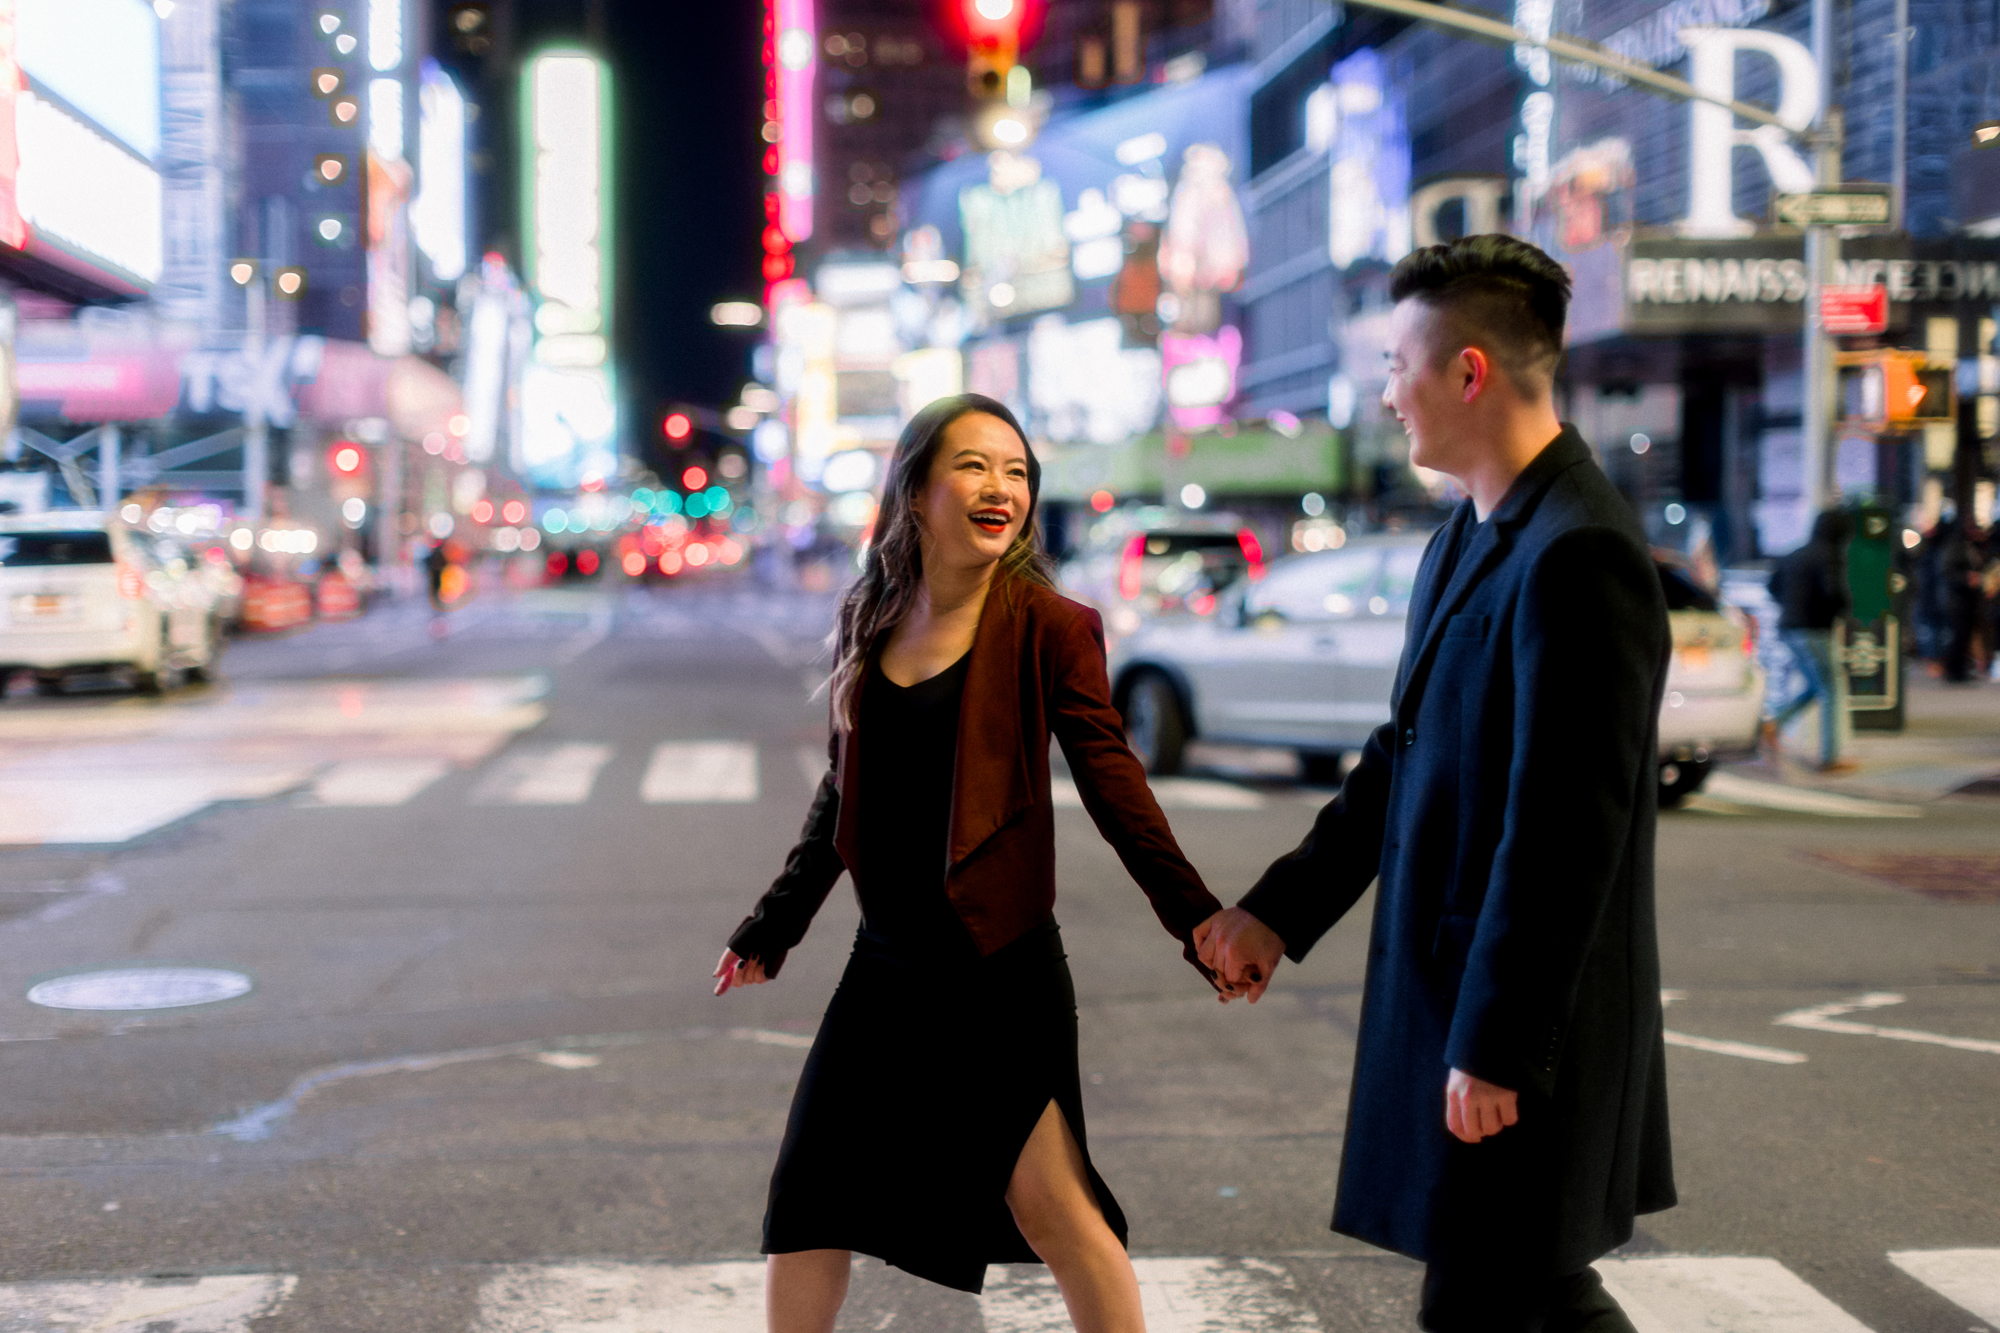 Glowing Iconic Winter Times Square Engagement Shoot  at Night